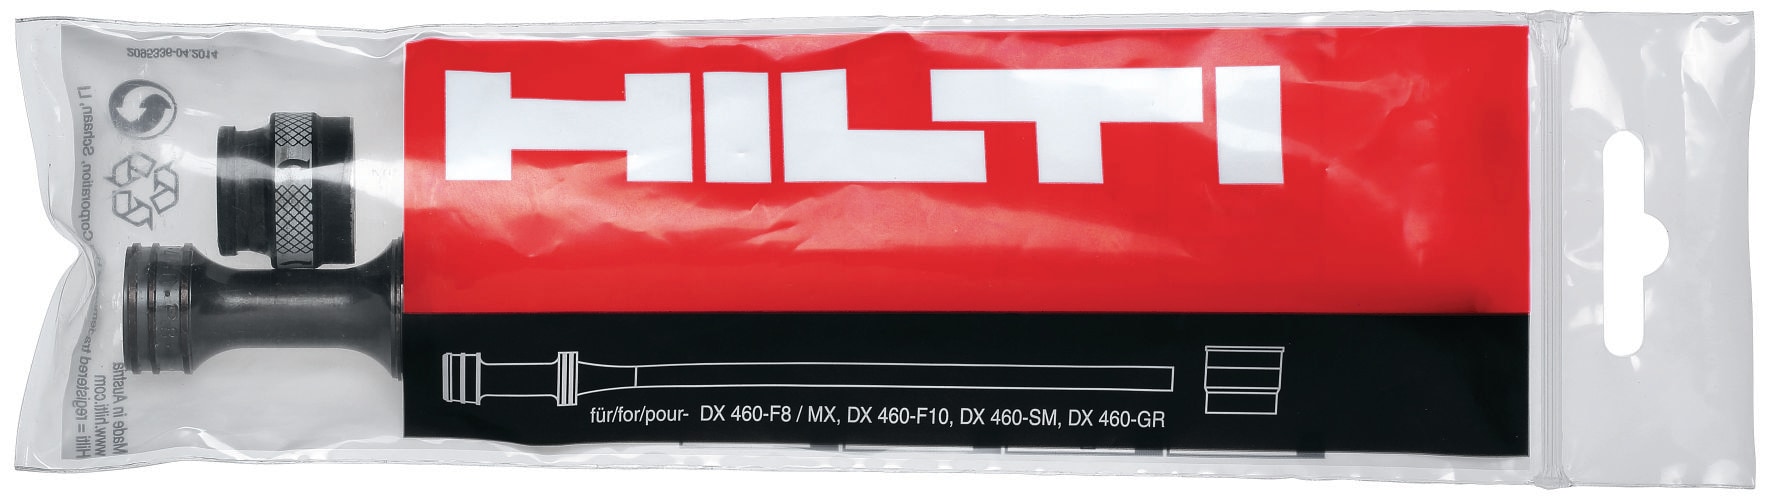 Accessory kit DX 351-CT - Accessories for direct fastening - Hilti USA